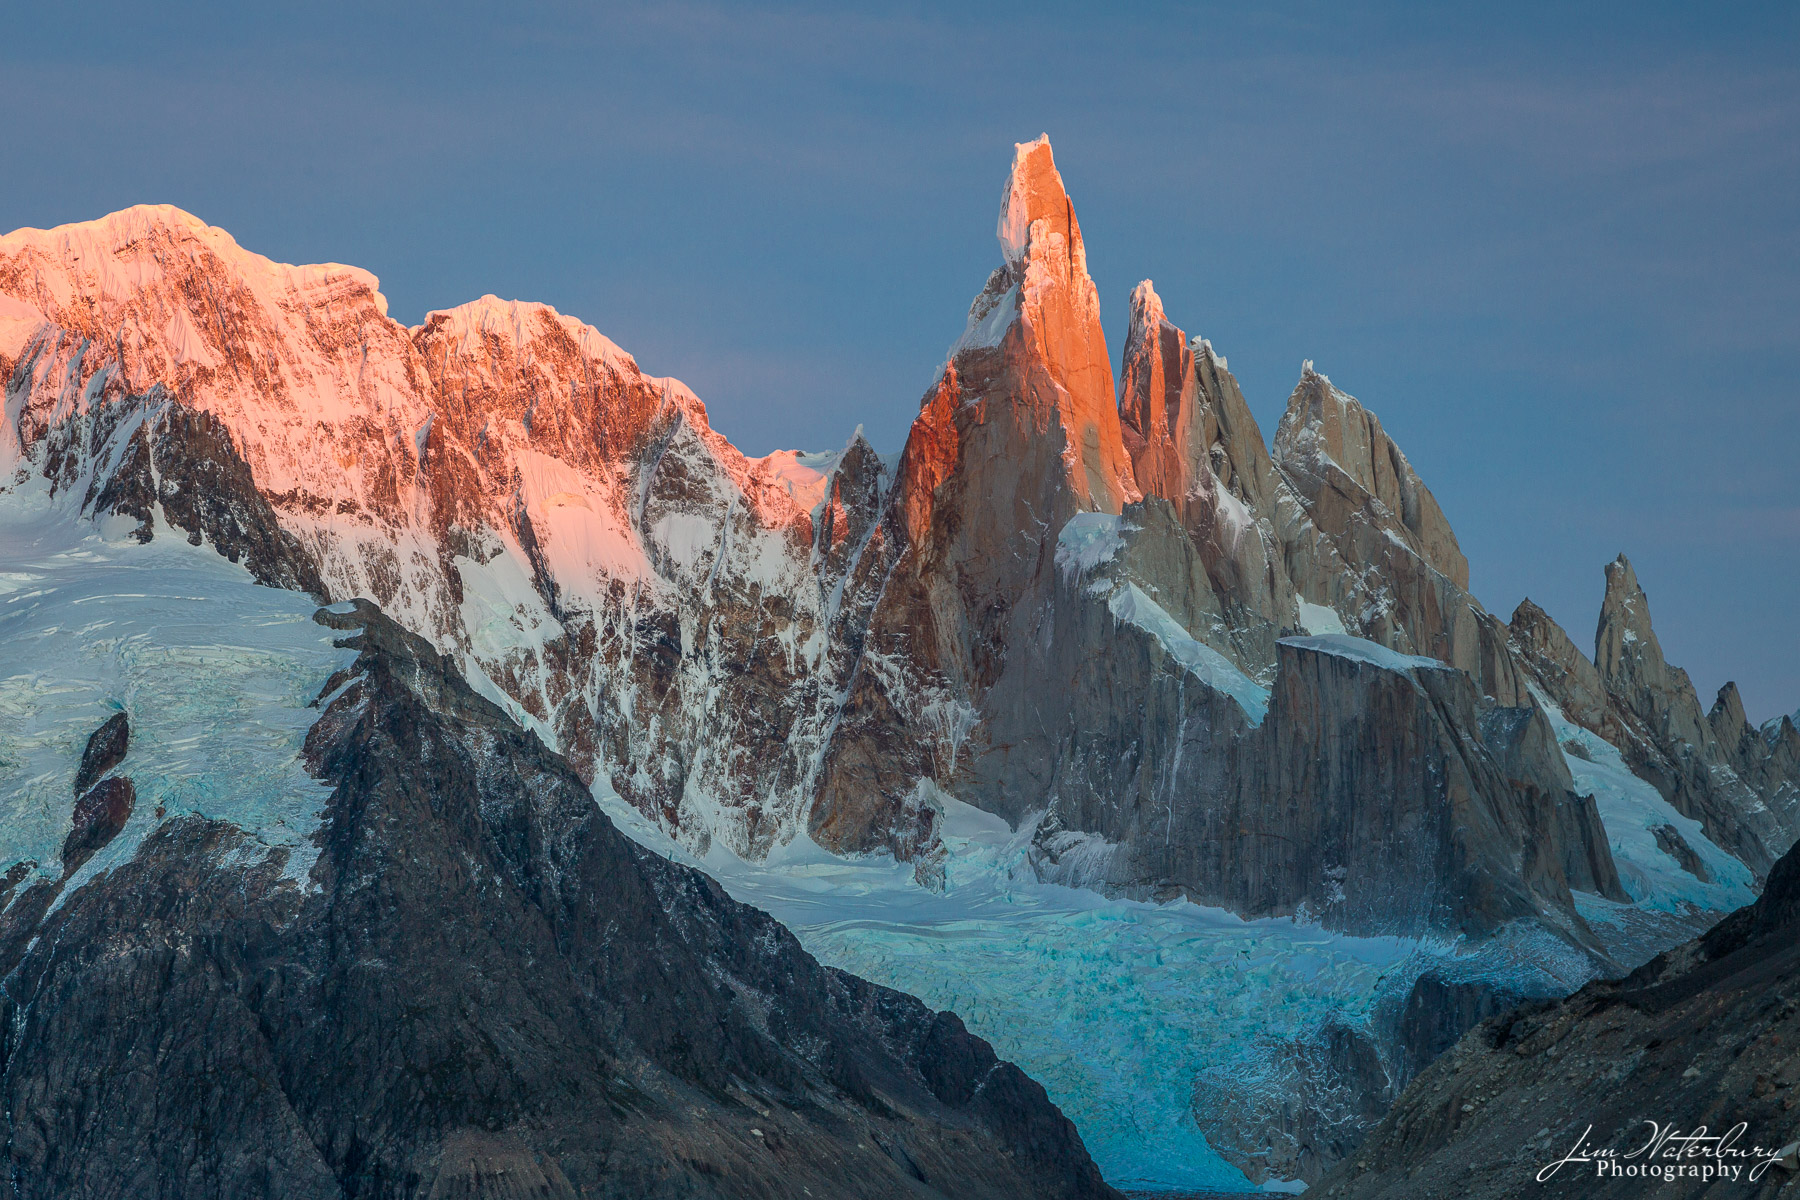 Sunrise over Cerro Torre Massif, Patagonia.  Cerro Torre itself is a 10,262-foot-high, sheer-walled granite tower on the border...